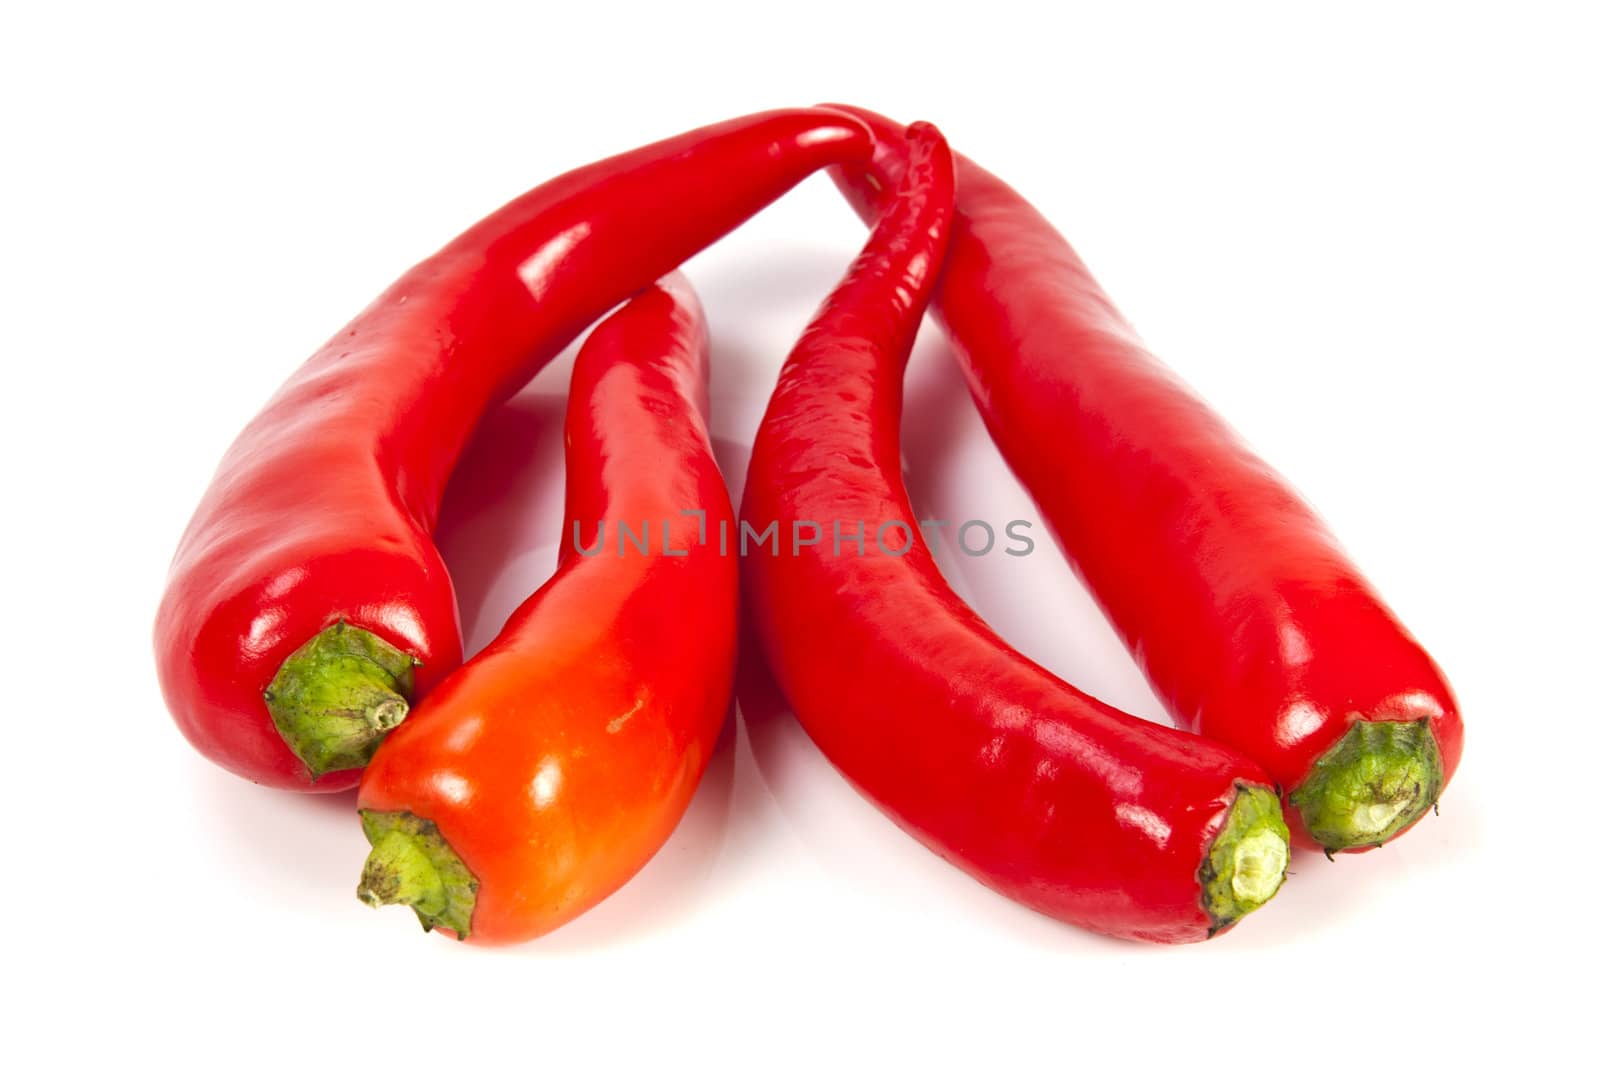 Fresh red hot pepper on a white background